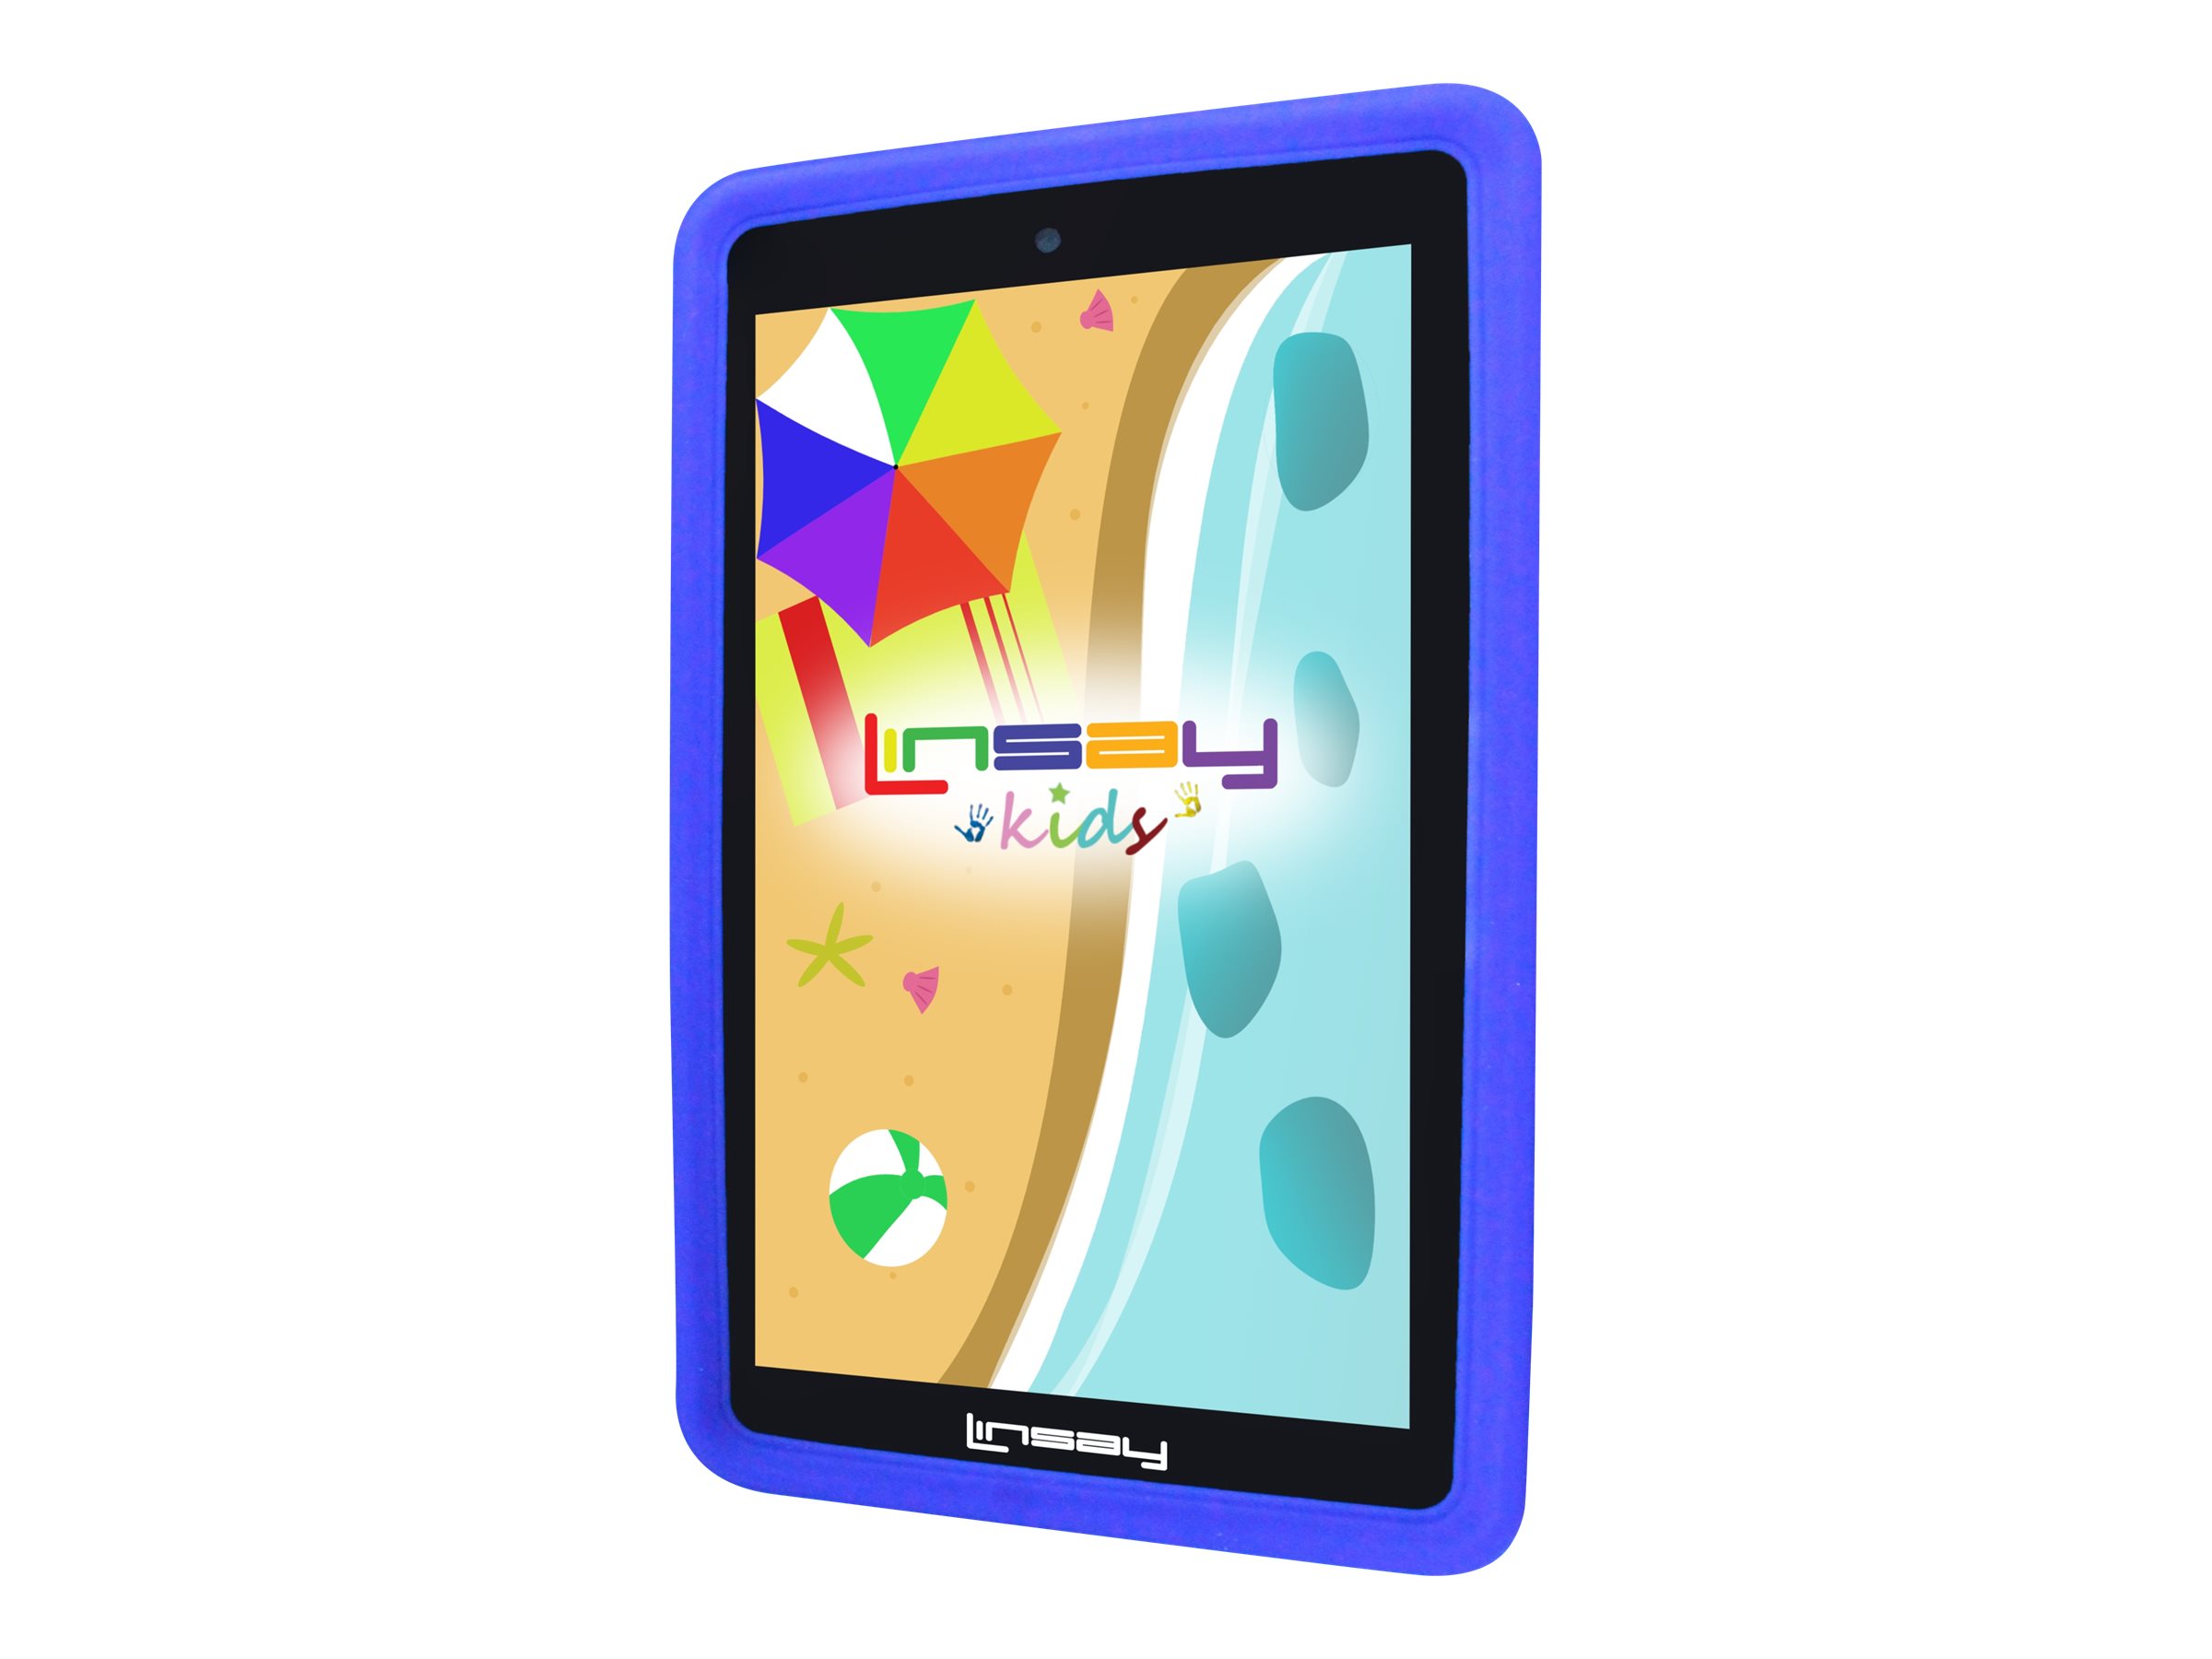 LINSAY 7" Kids Tablet 64GB Android 13 WiFi  Camera, Apps, Games, Learning Tab for Children with Blue Kid Defender Case. - image 2 of 3